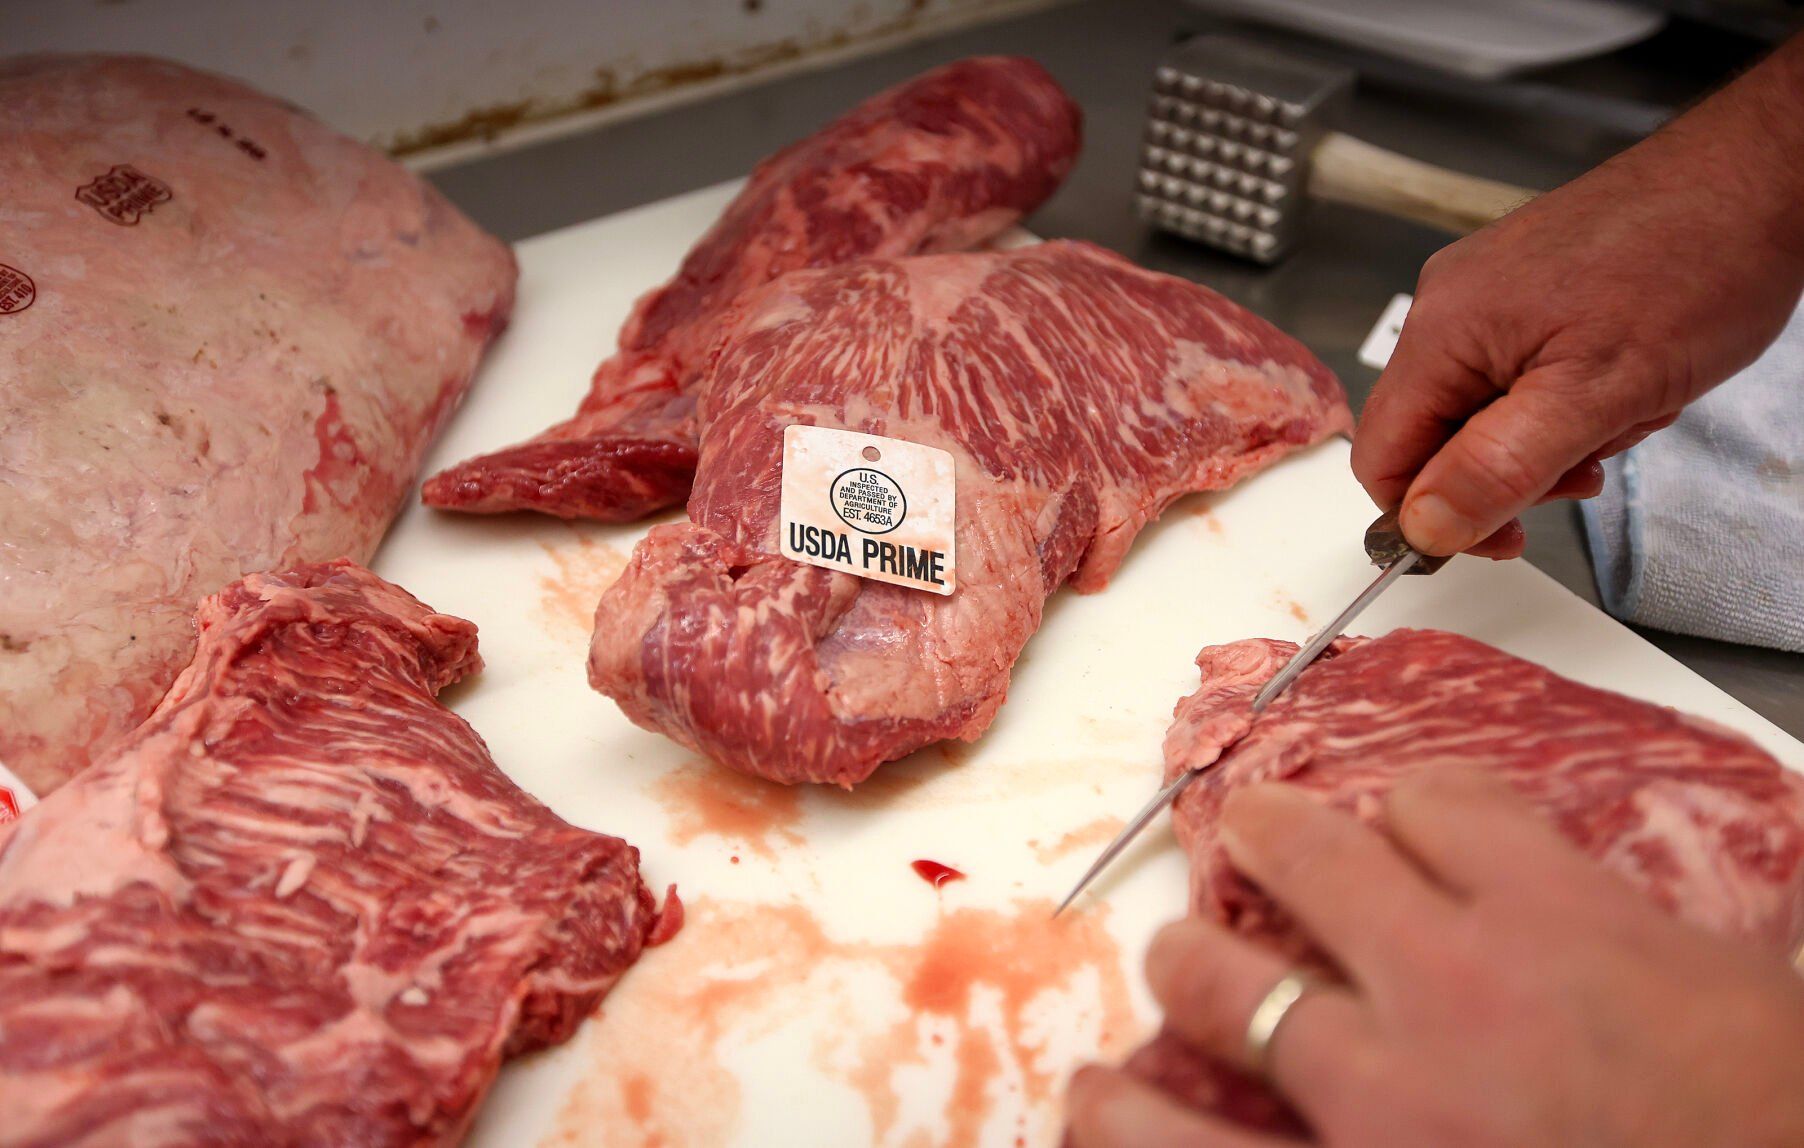 Jeff Cremer, of Cremer’s Grocery, says the marbling in the meat is something to look for when shopping for a quality steak.    PHOTO CREDIT: Dave Kettering/Telegraph Herald